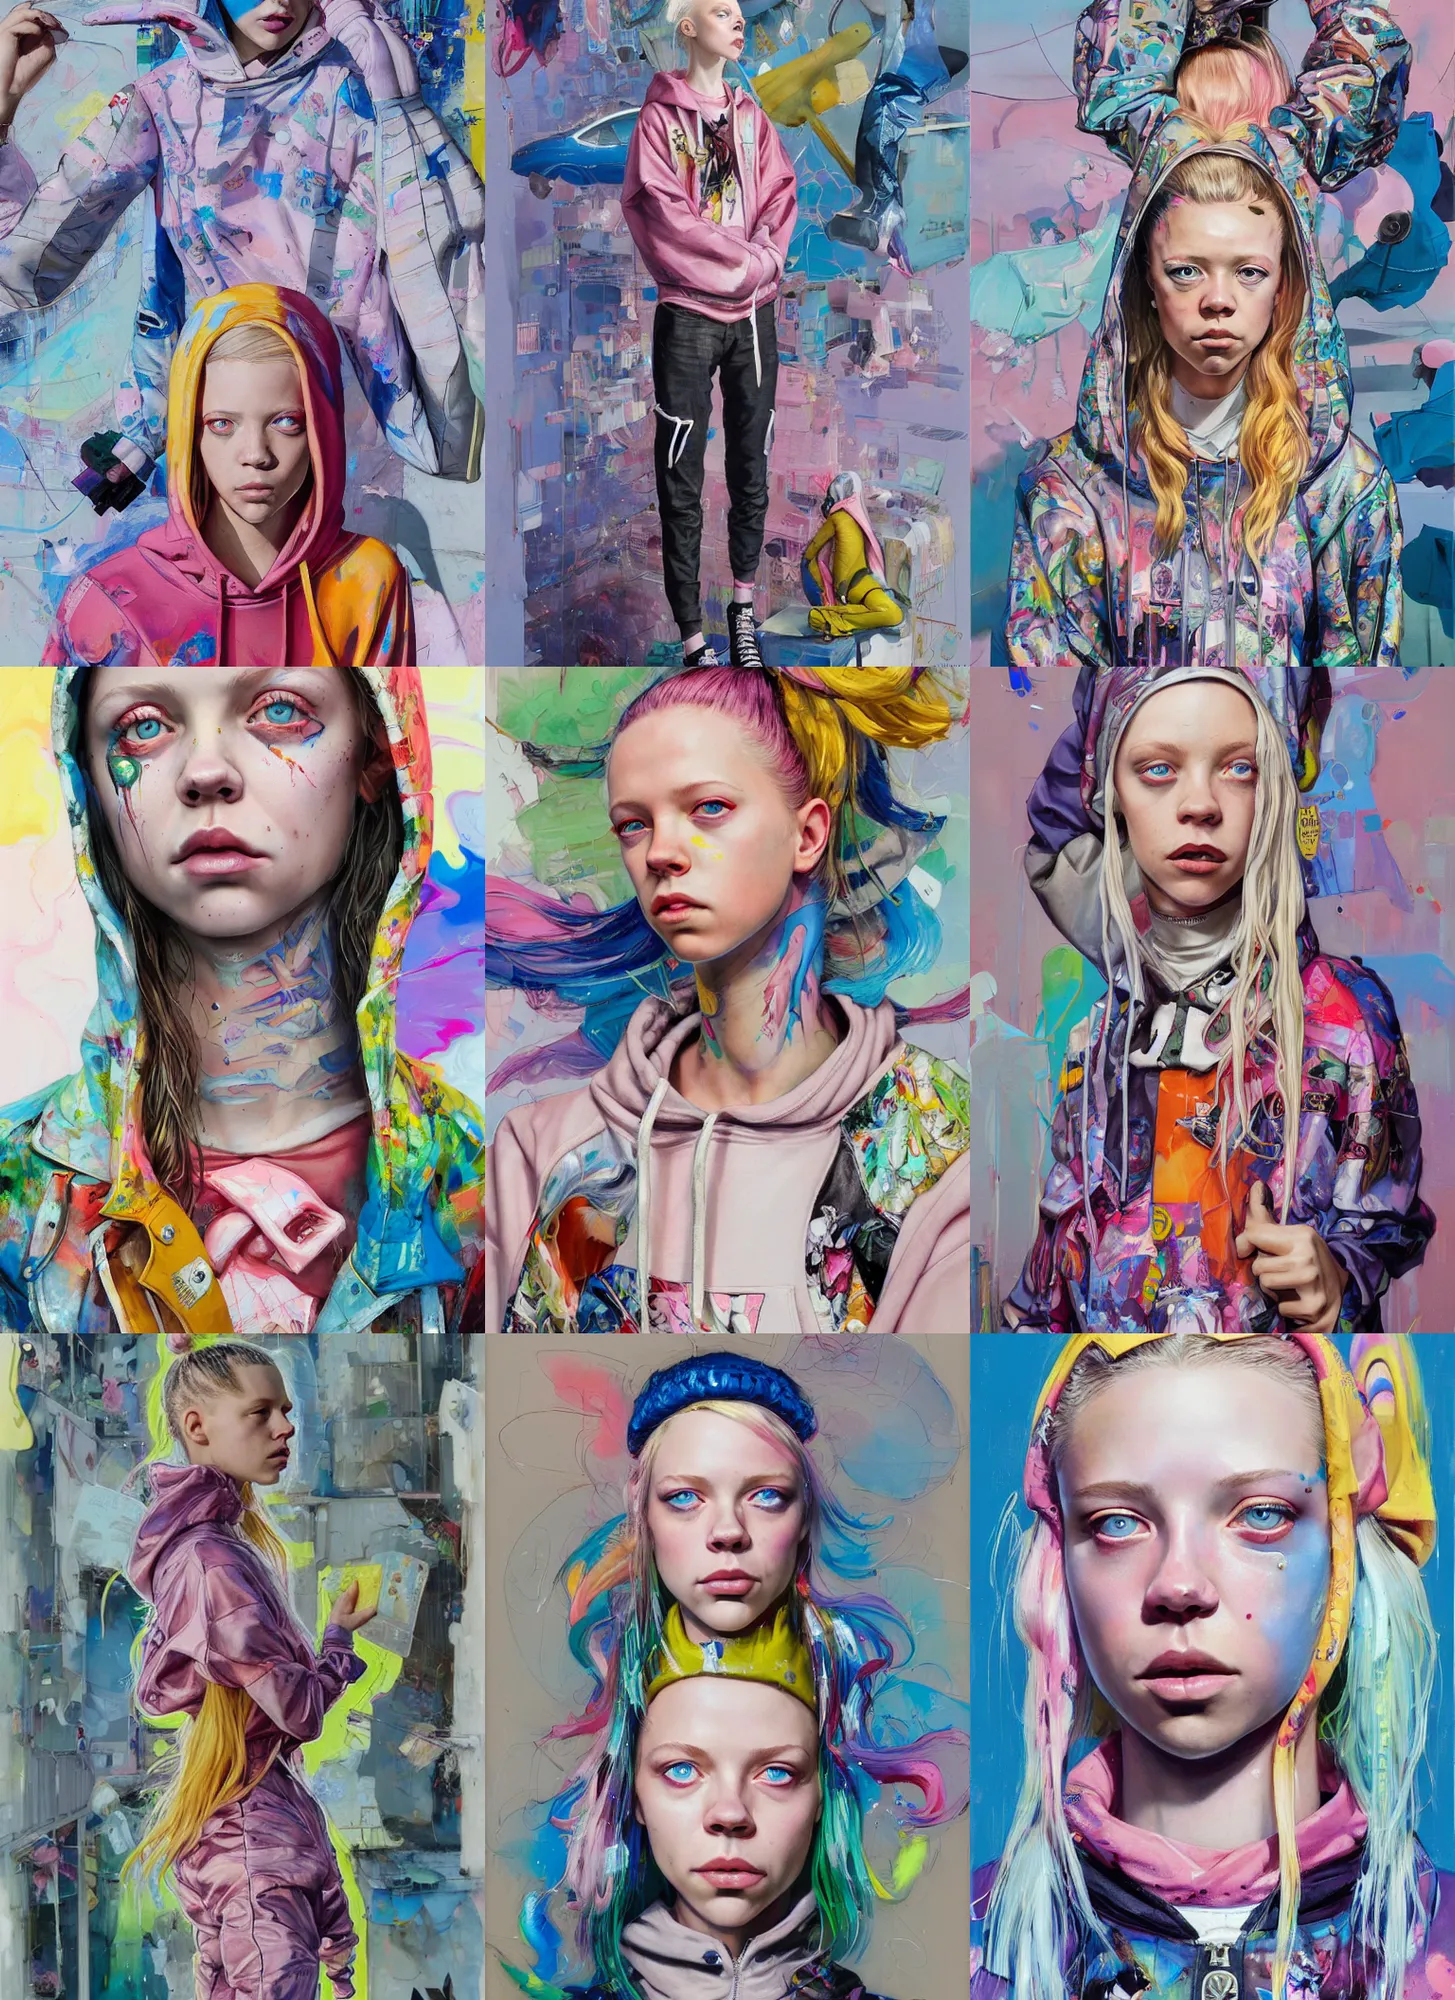 Prompt: ( ( hunter schafer ) ) sydney sweeney from die antwoord by martine johanna and donato giancola, wearing a hoodie, standing in a township street, street fashion outfit,!! haute couture!!, full figure painting by john berkey, david choe, ismail inceoglu, pastel color, detailed impasto brush strokes, 2 4 mm lens